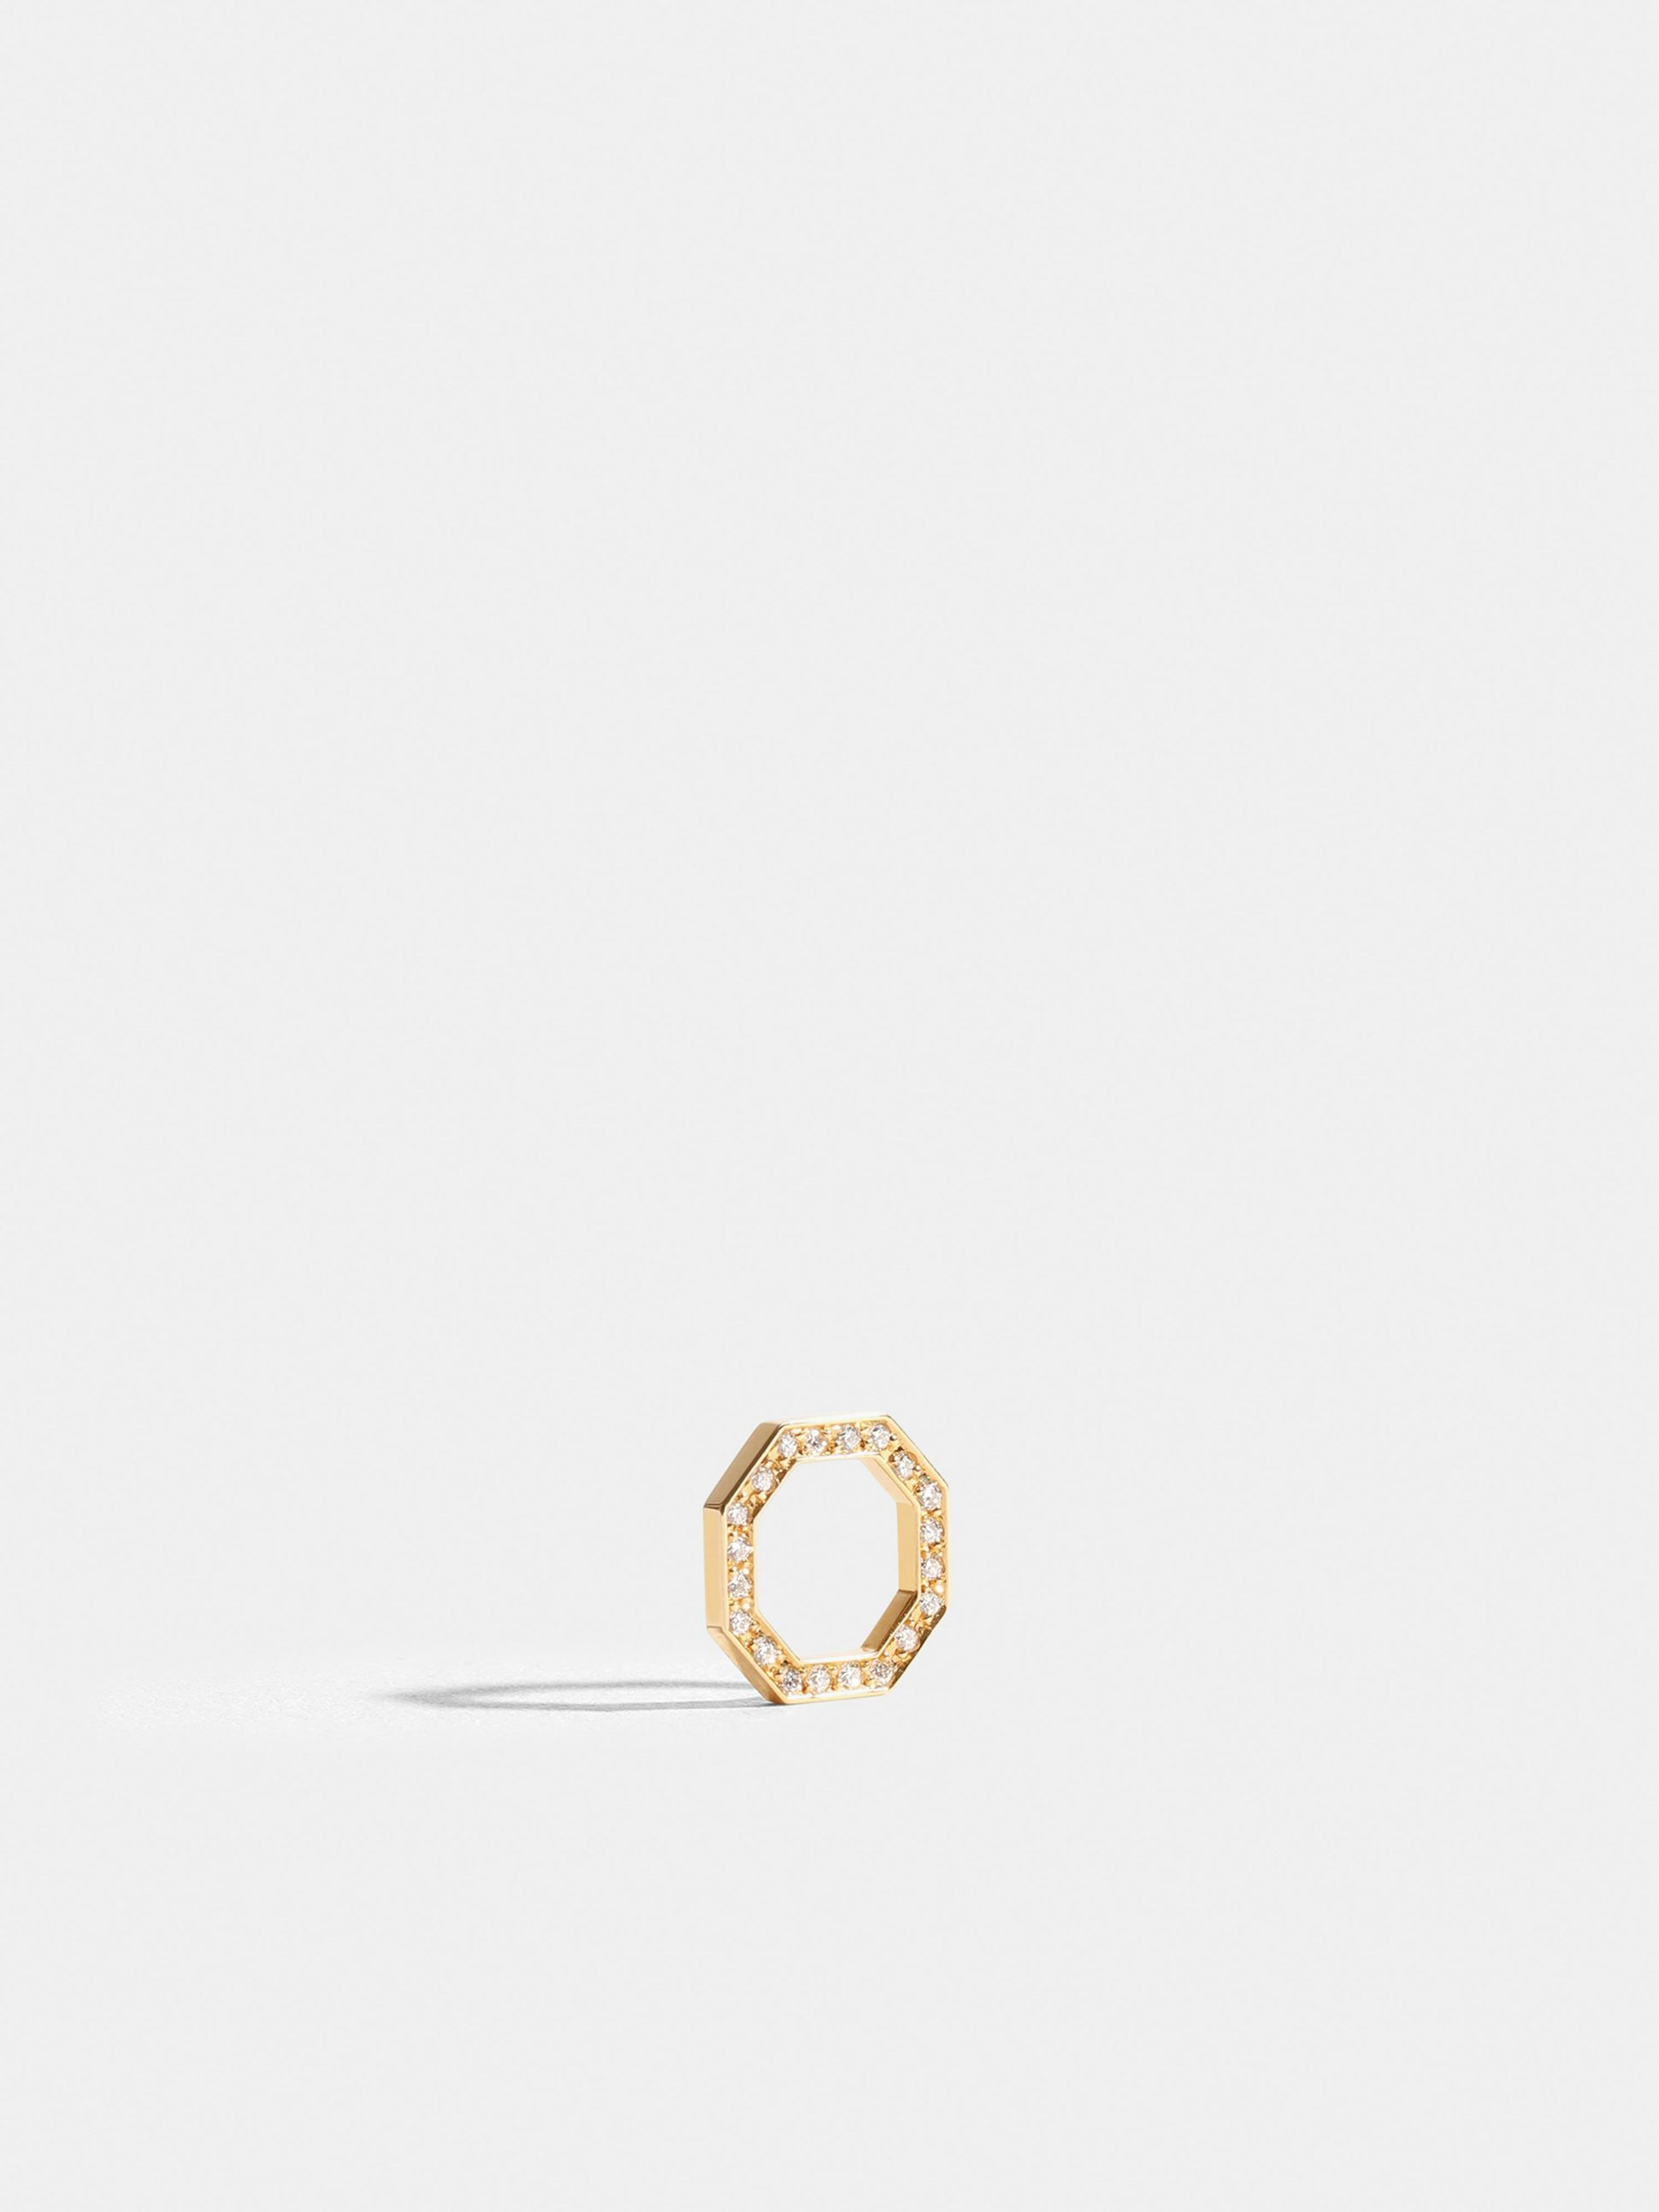 Octogone motif in 18k Fairmined ethical yellow gold, paved with lab-grown diamonds, on a black cord.